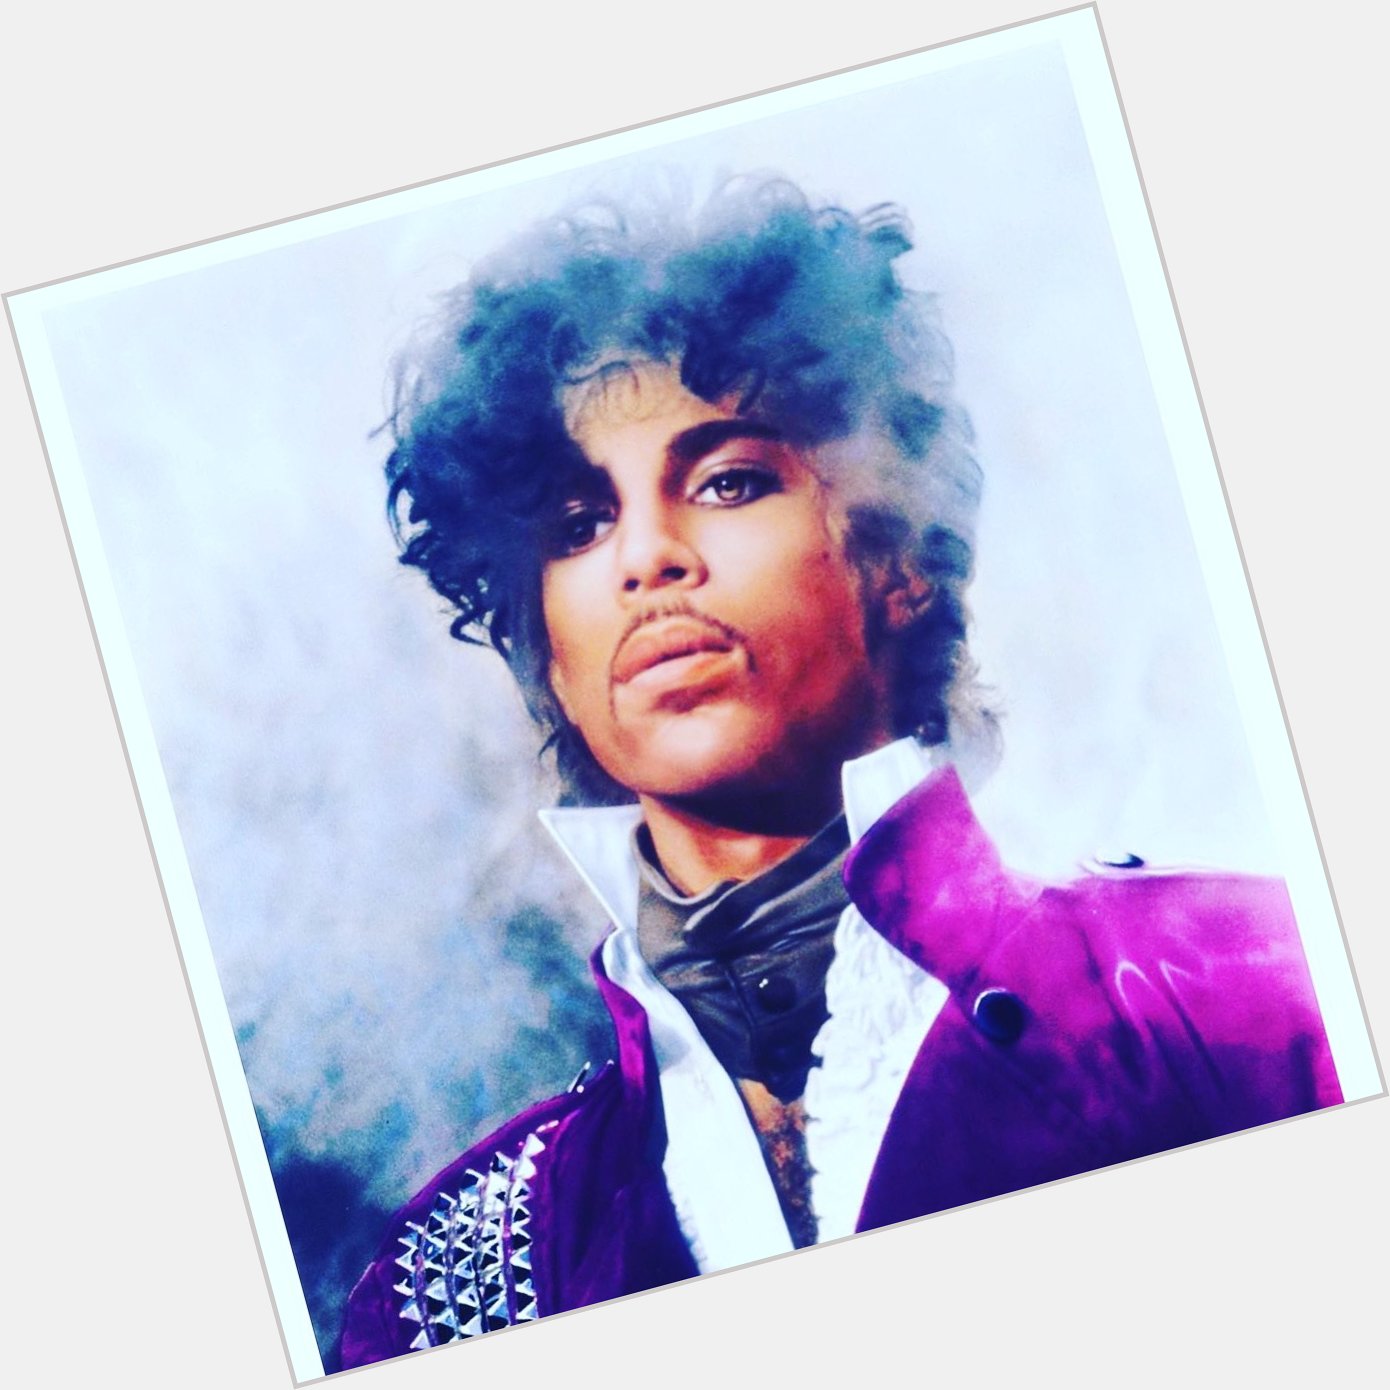 Happy Birthday Prince ... His Royal Badness ... a legend & one of the greatest musicians of all time 